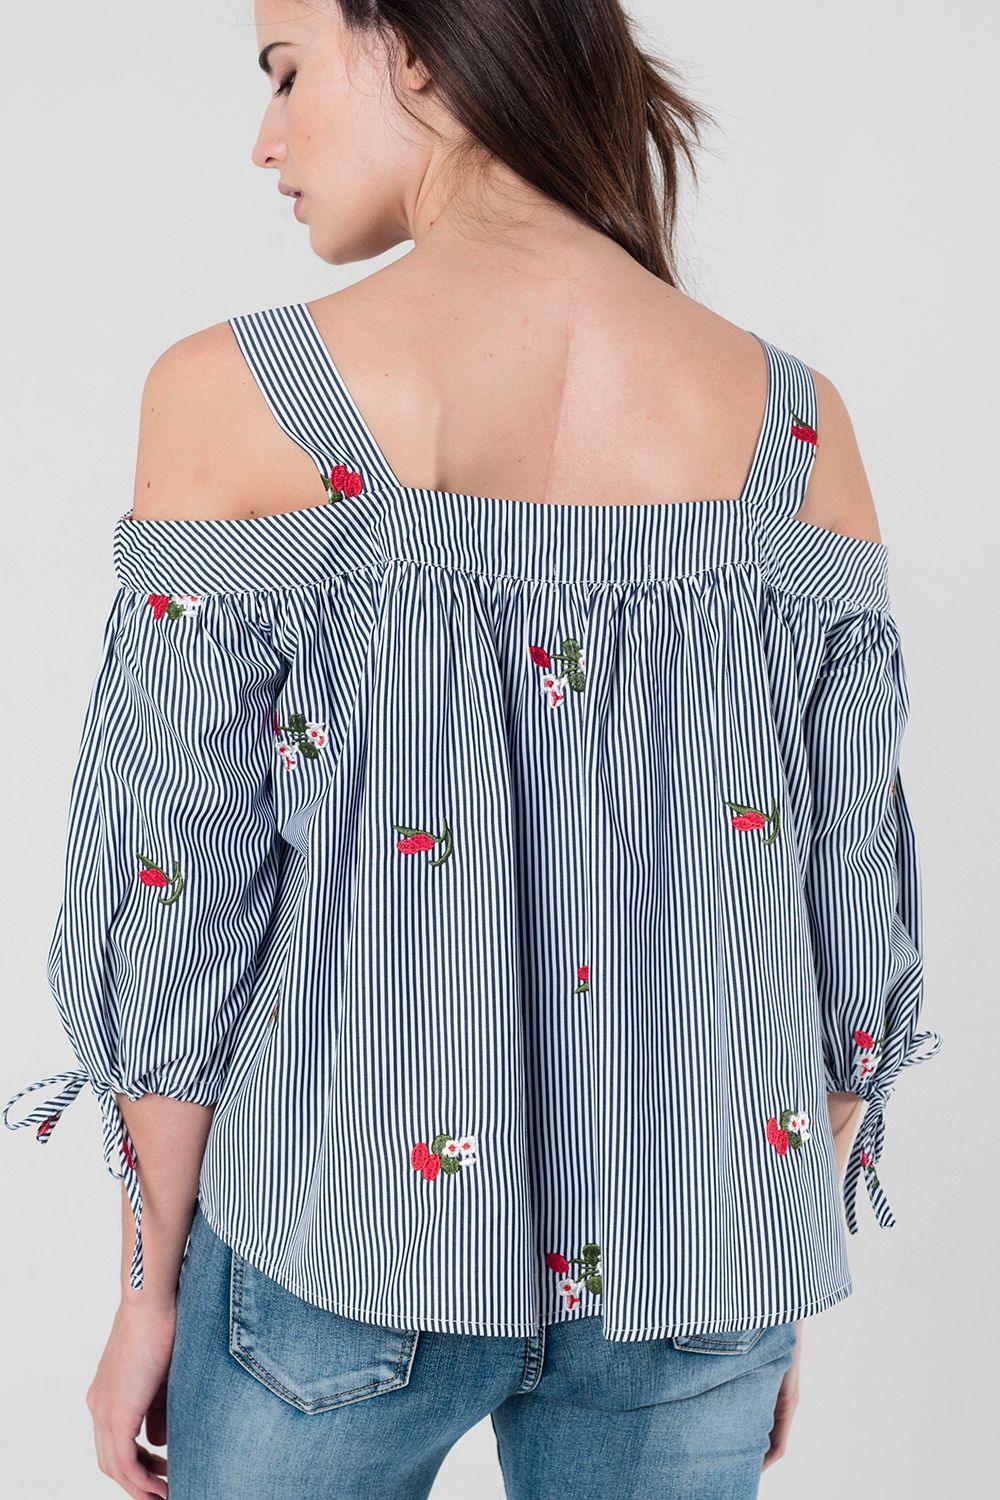 Embroidered cold shoulder striped top in navy Szua Store